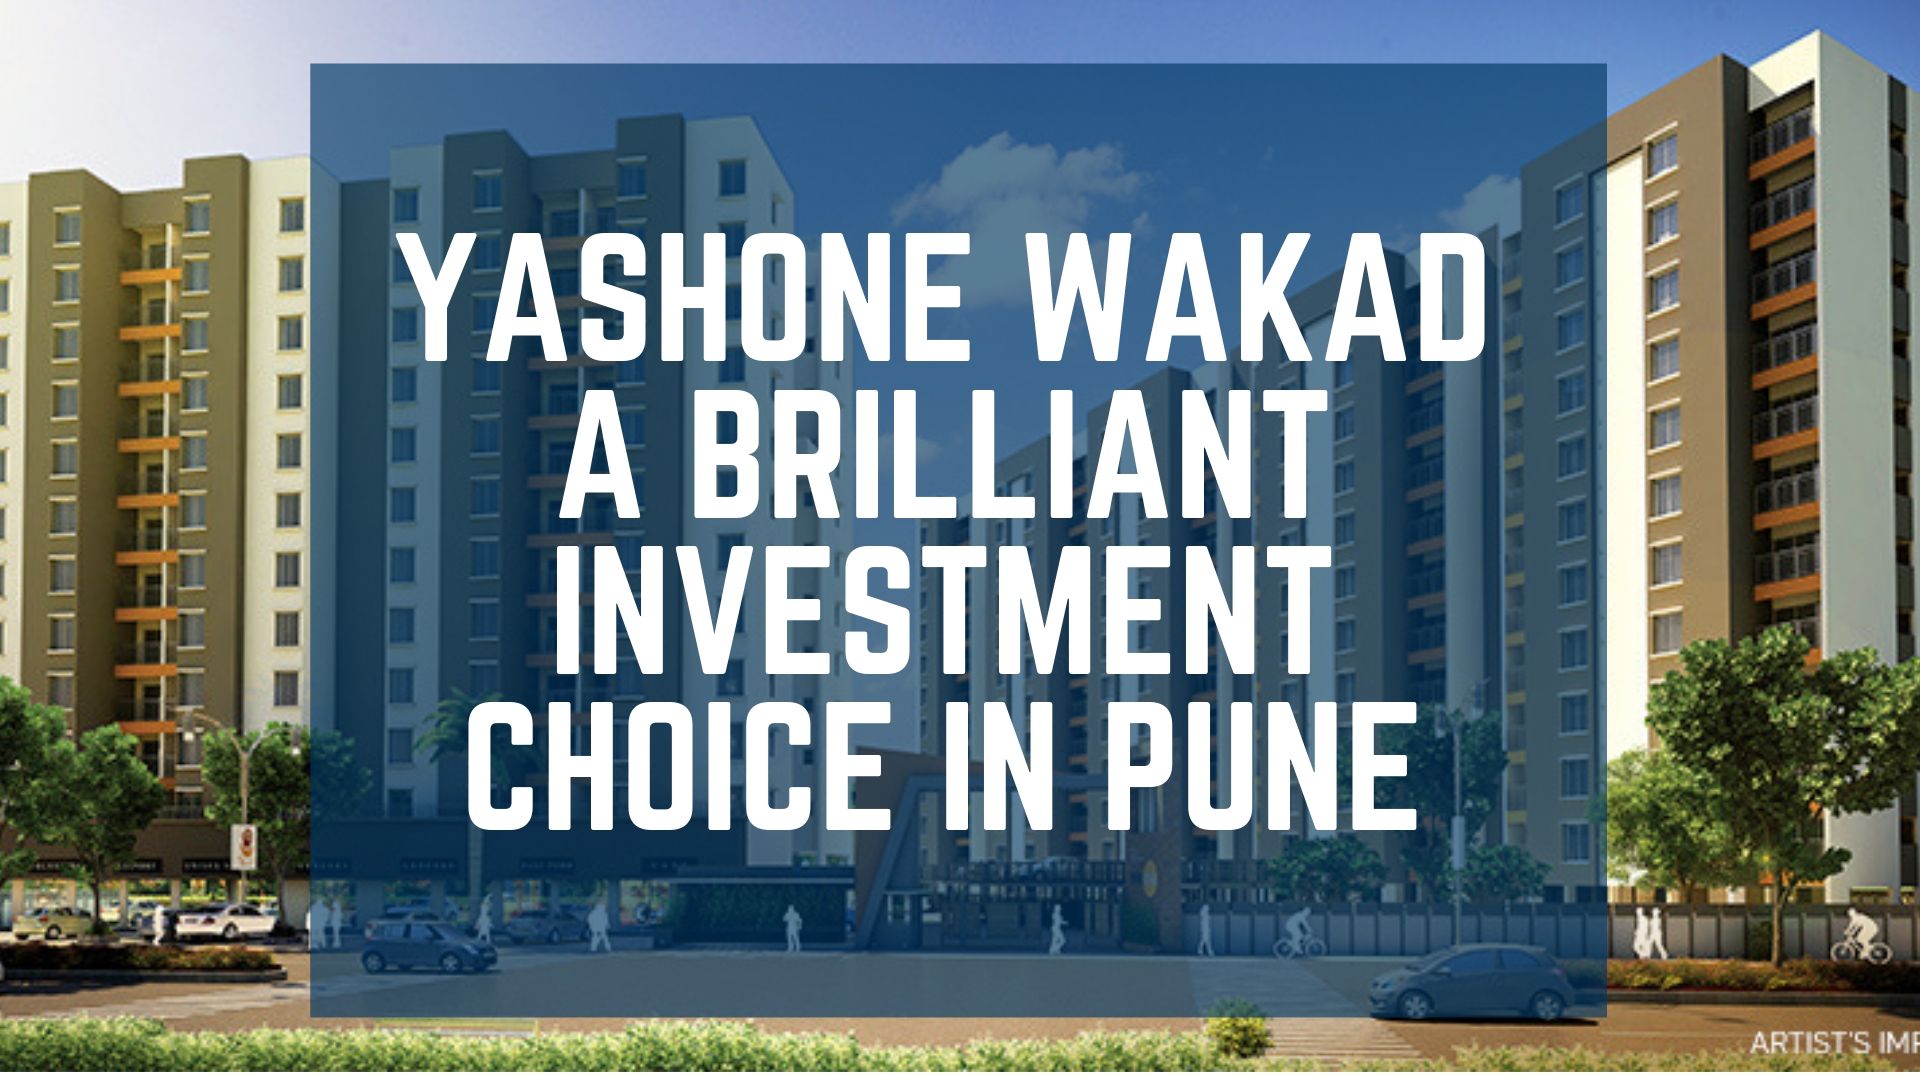 Yashone Wakad  A Brilliant Investment Choice in Pune